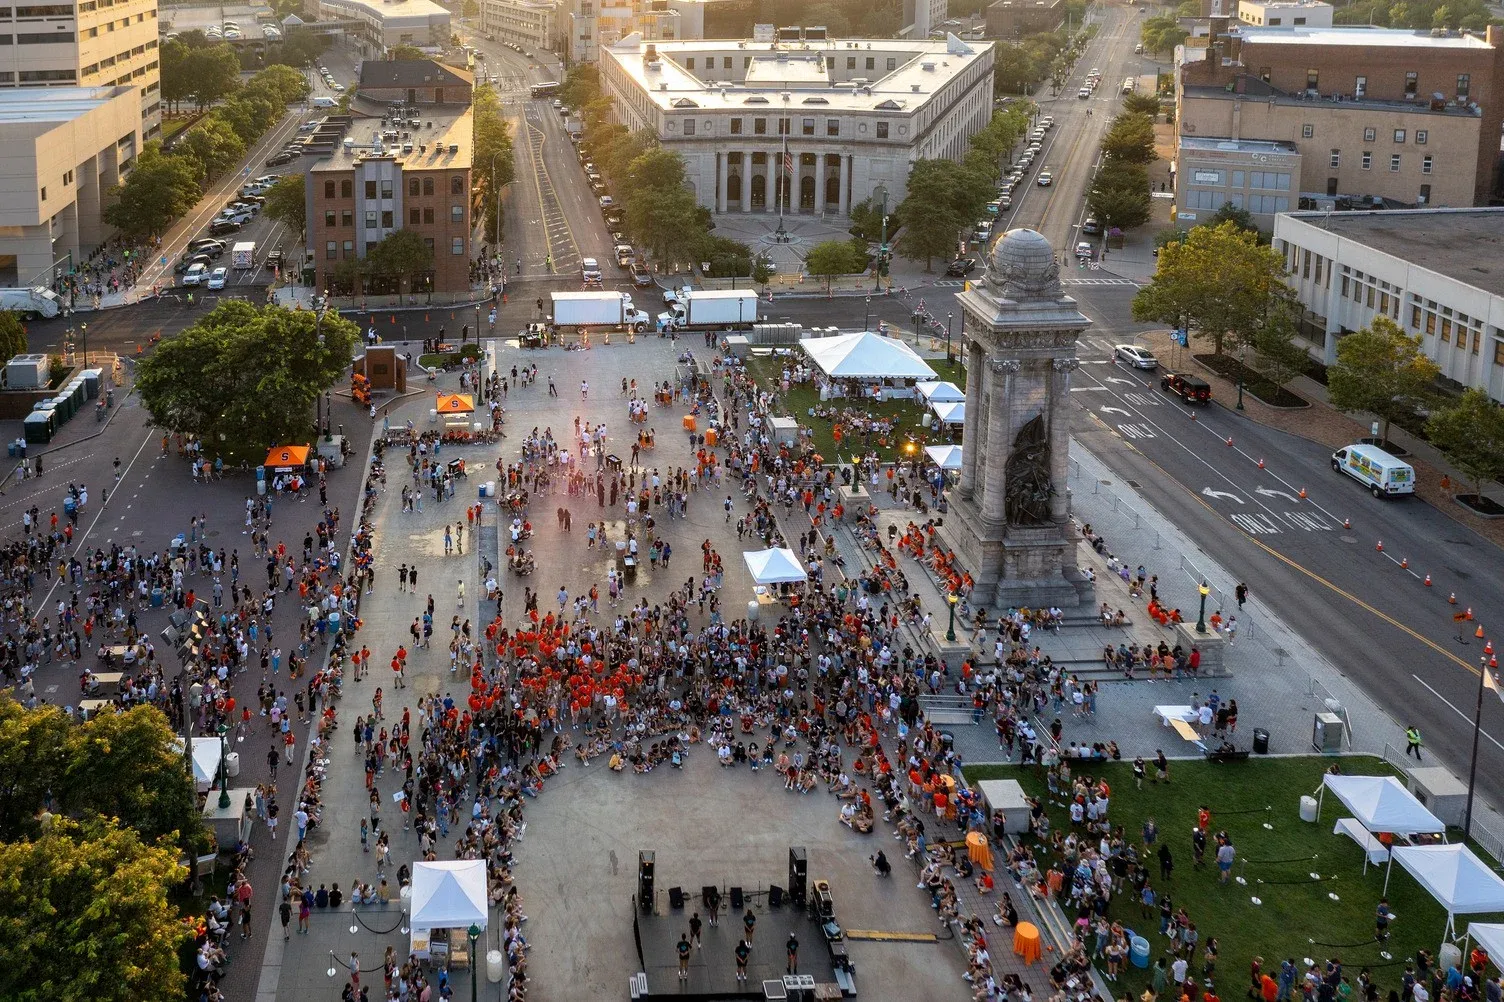 Aerial view of downtown Syracuse with large group of people in Clinton Square.